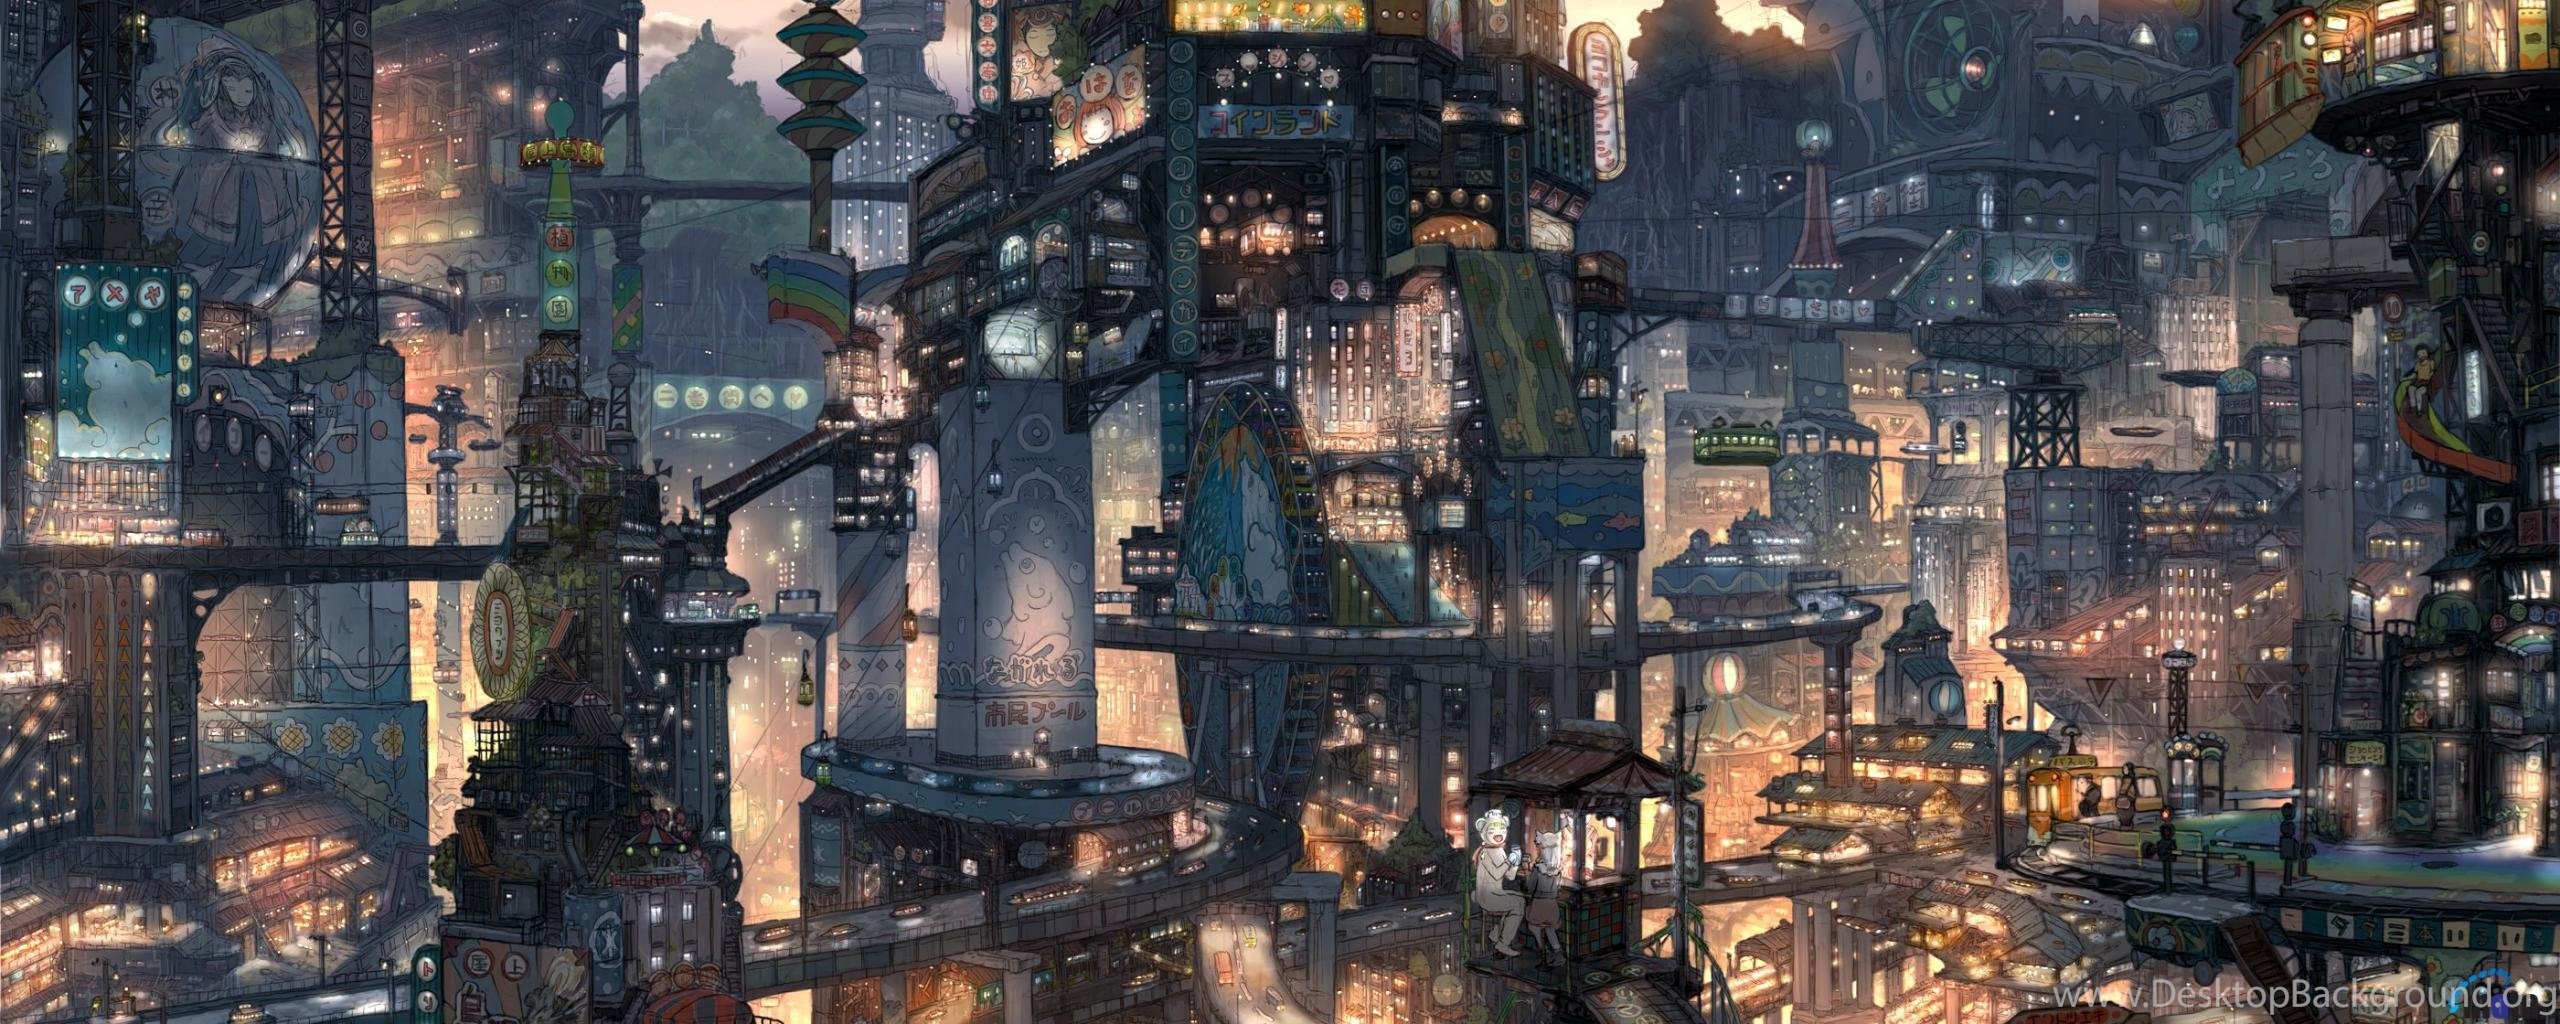 Download Wallpapers Anime City (2560 X 1024 Dual Monitor ...